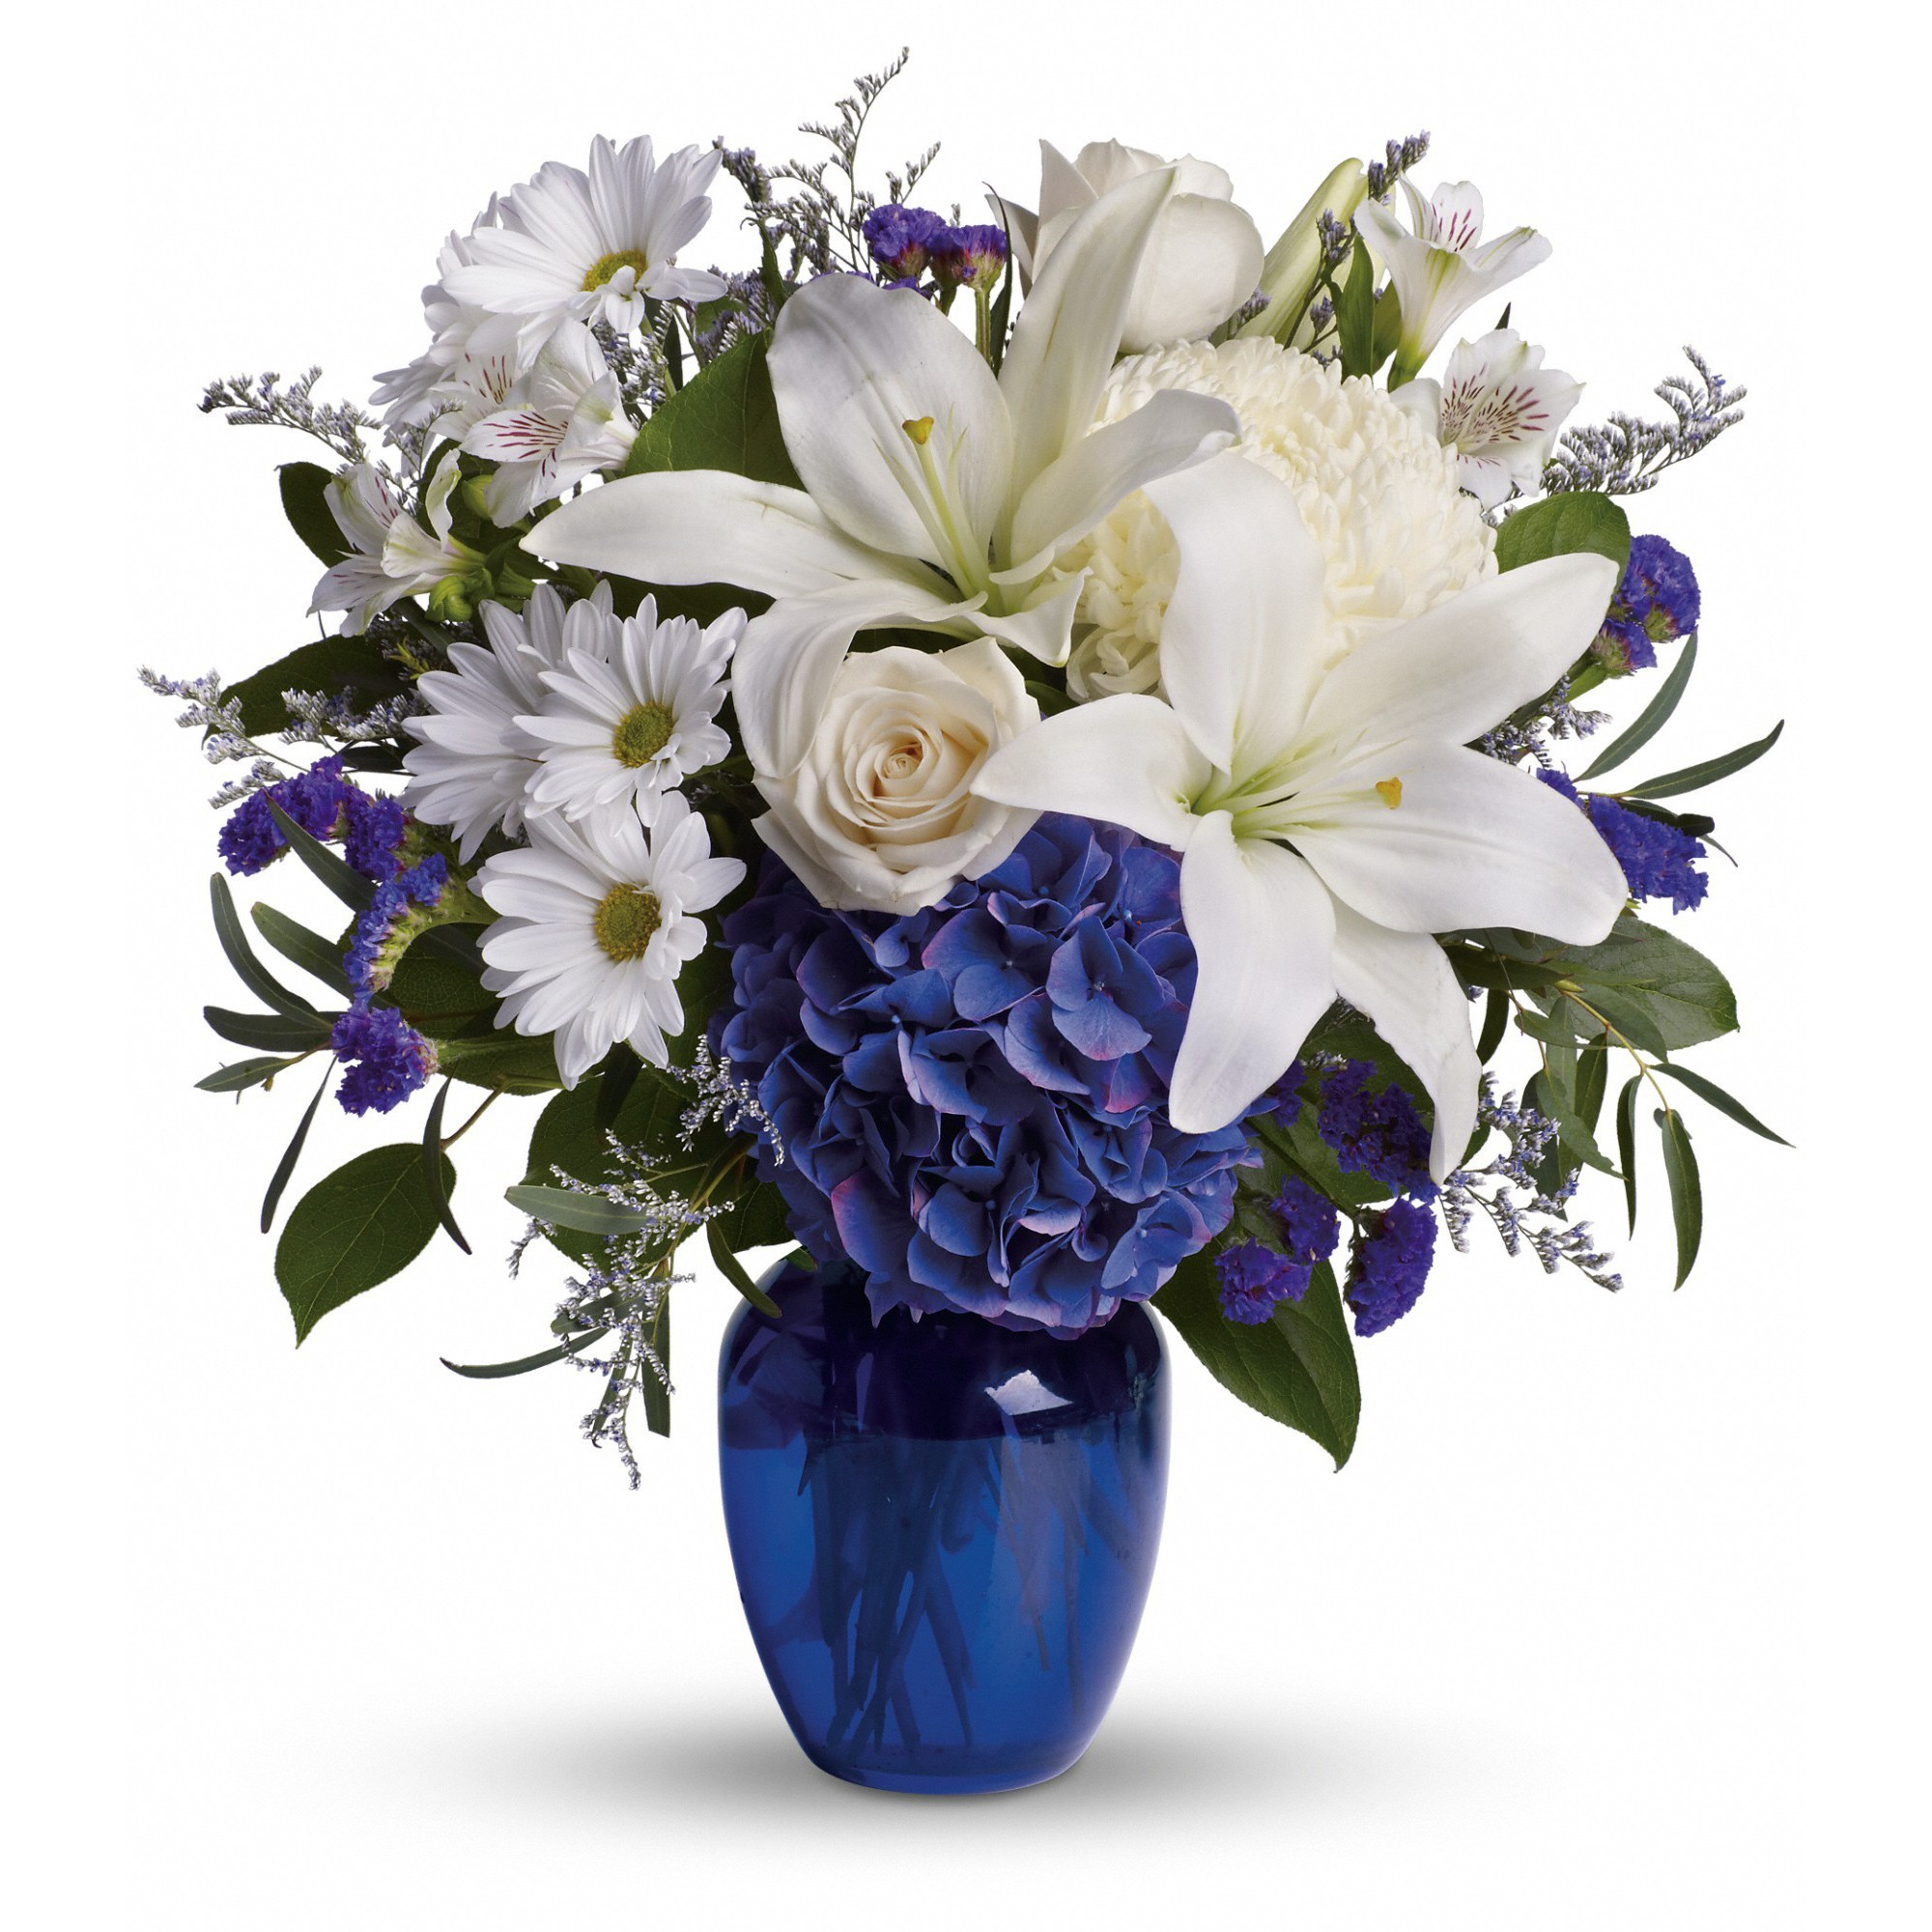 18 Unique Flower Delivery without Vase 2024 free download flower delivery without vase of beautiful in blue in lake worth tx lake worth florist regarding beautiful in blue